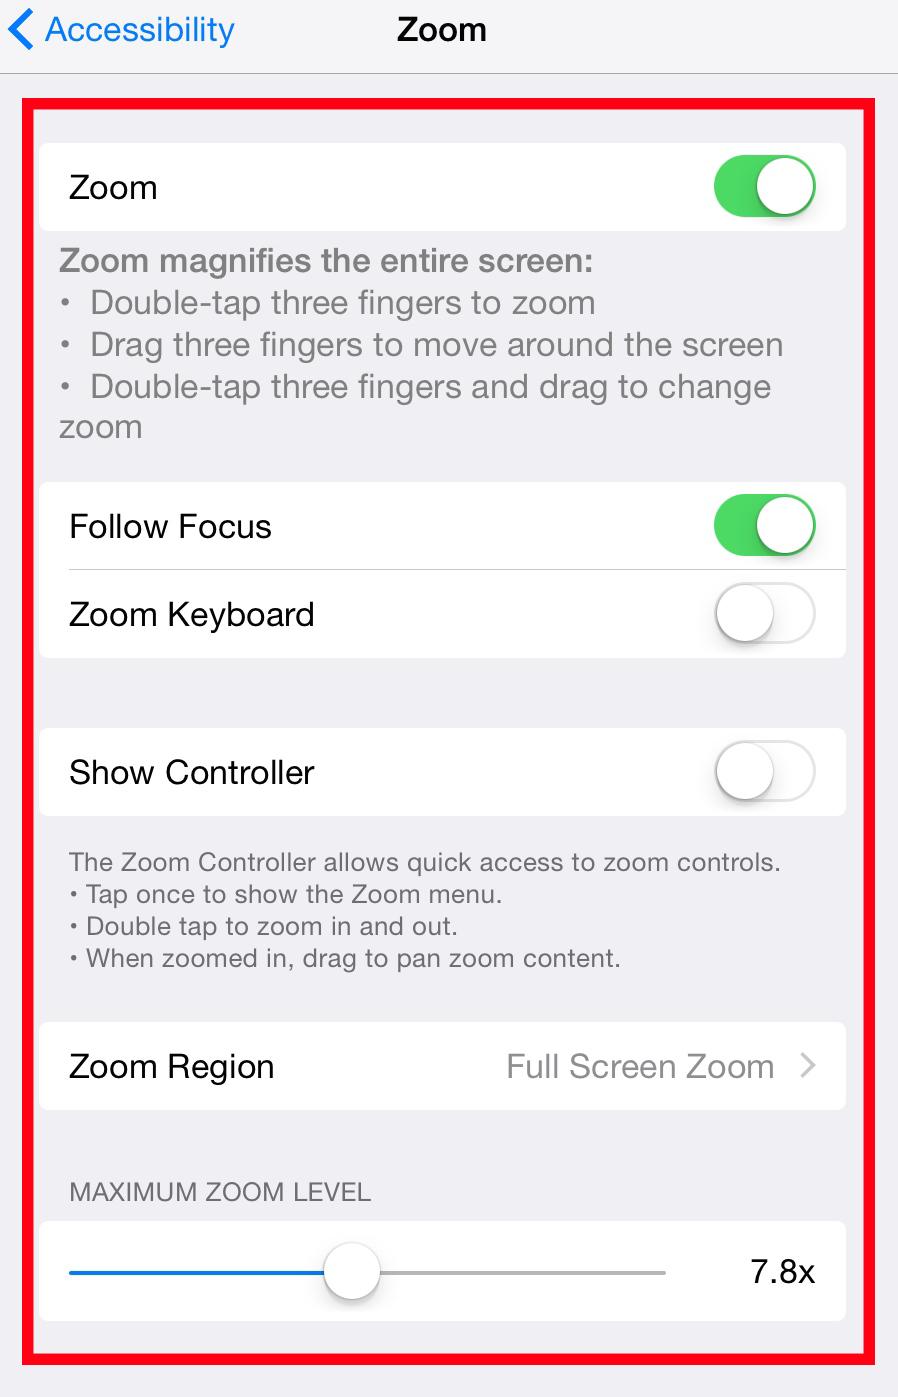 Controls: Double tap three fingers to zoom.